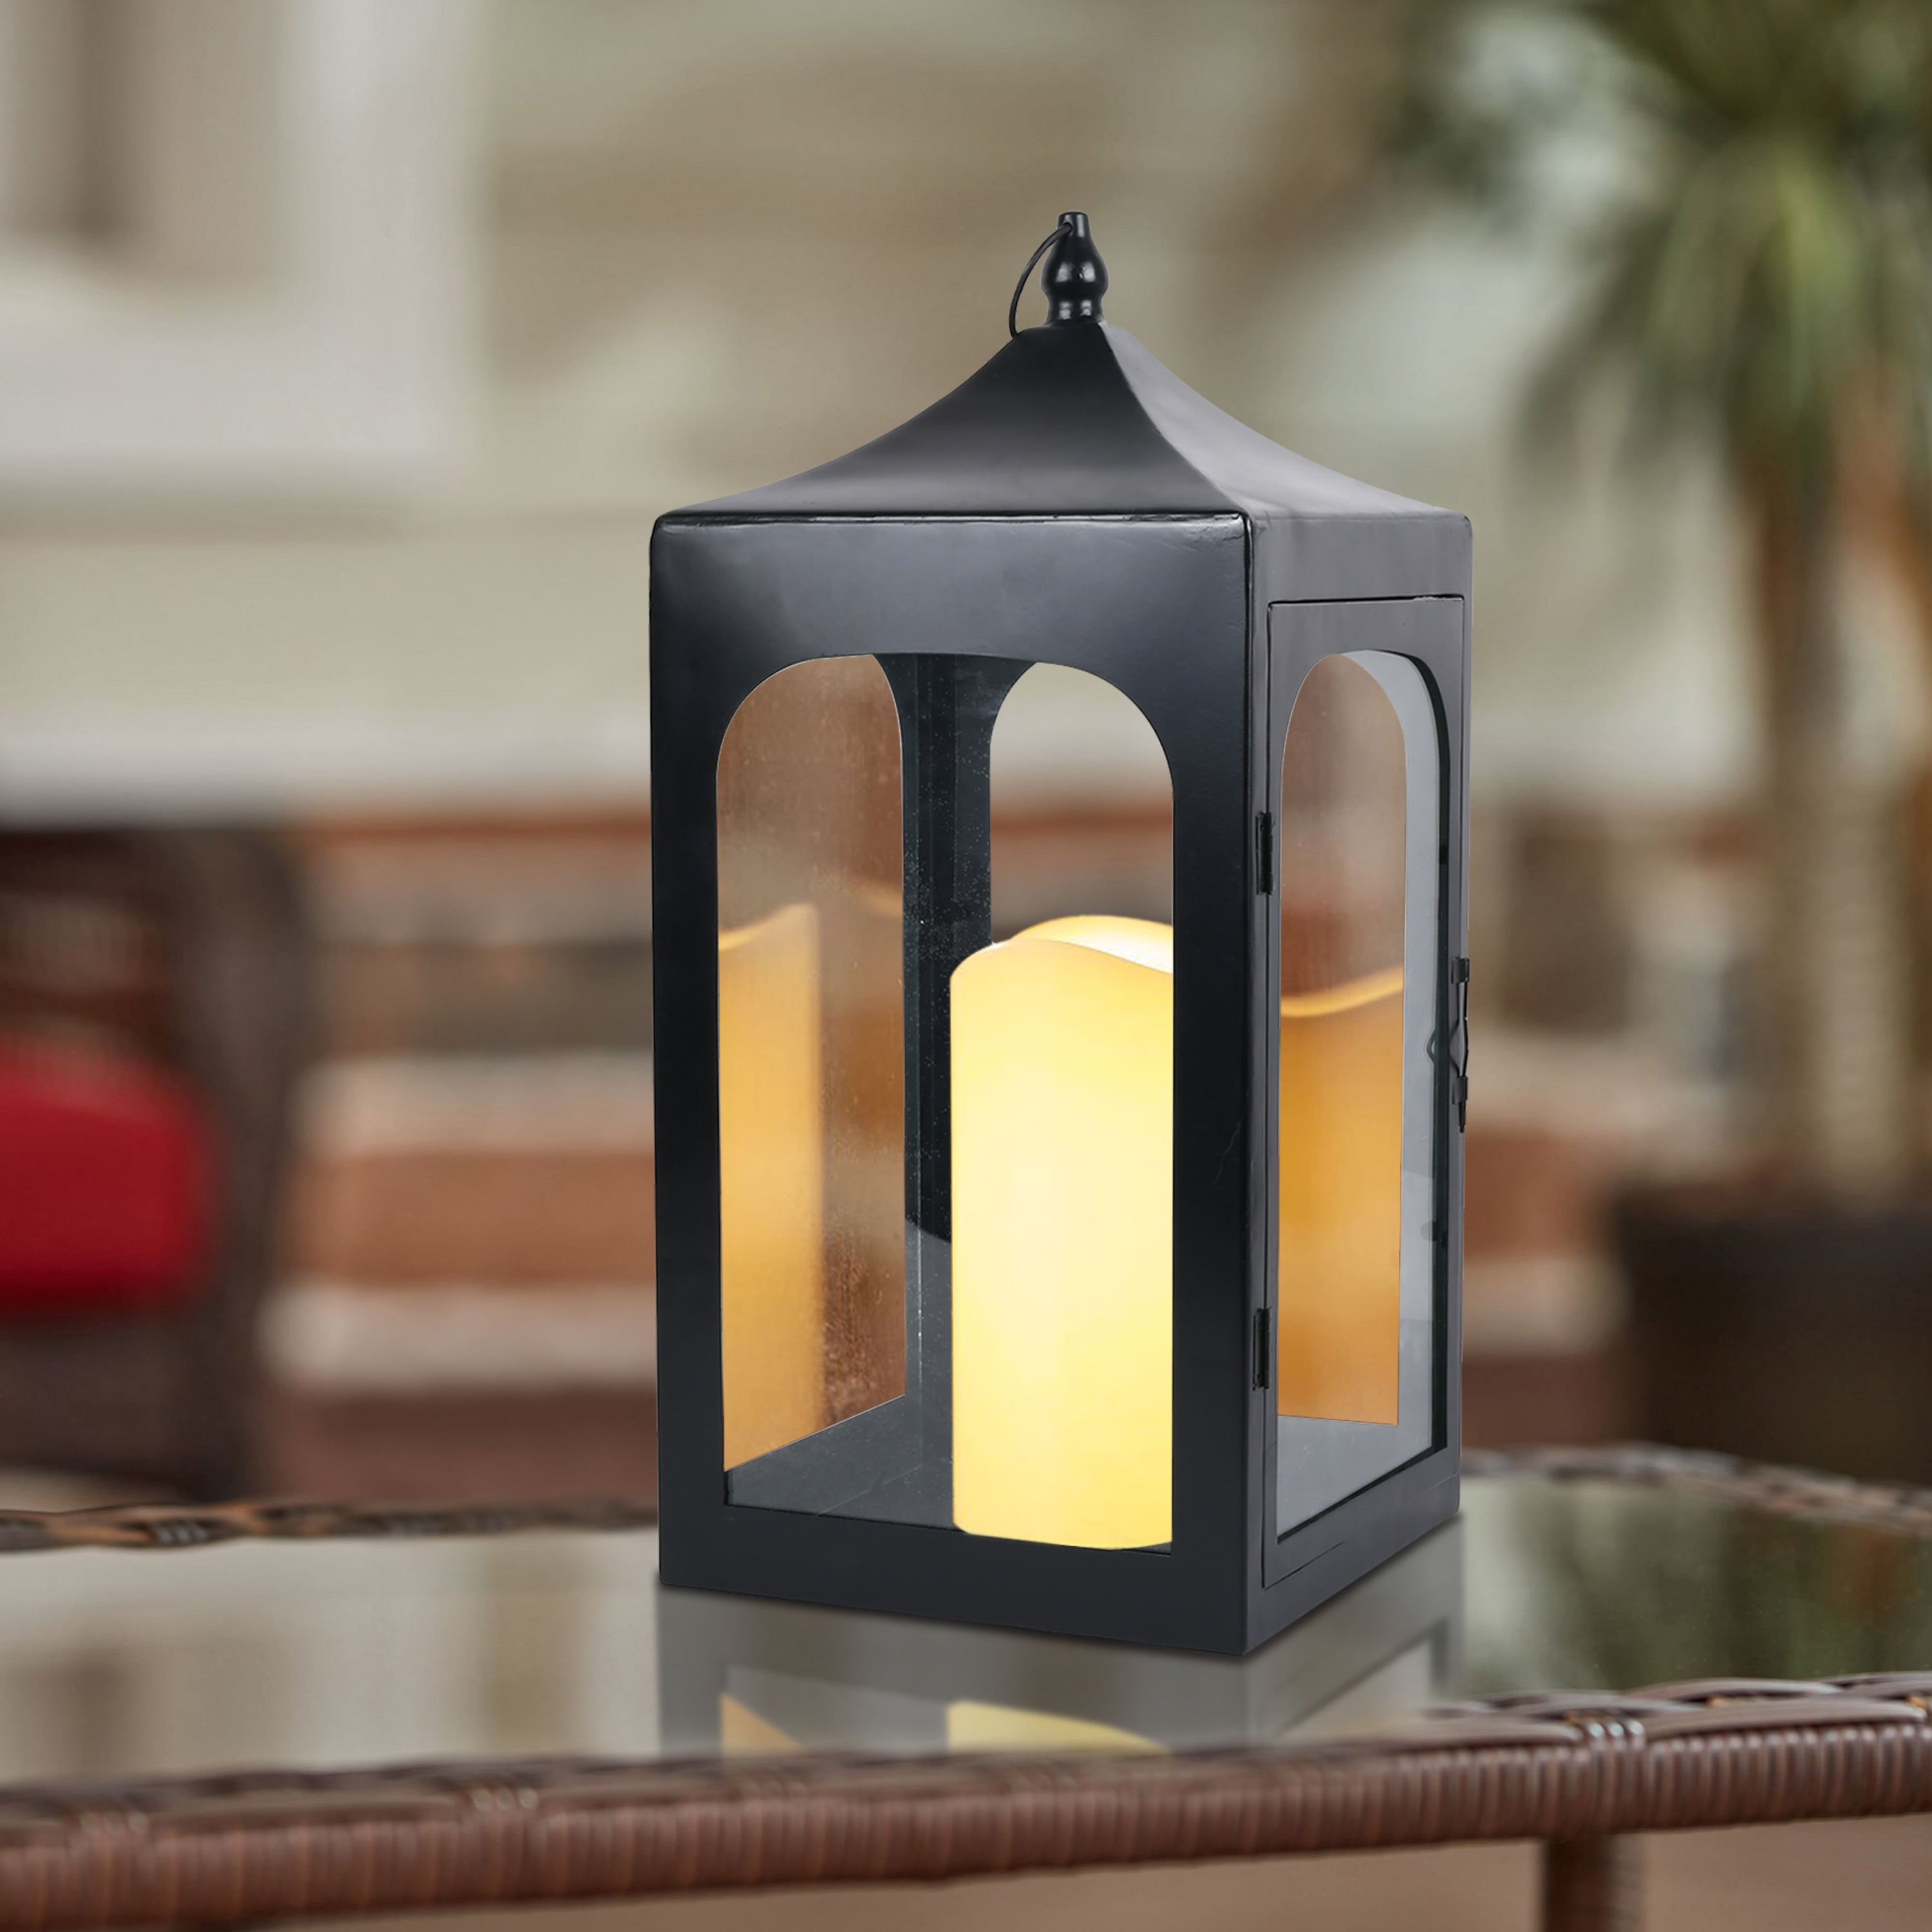  Outdoor Lantern Decorative Outdoor Patio Decor, 16 Inch Candle  Lantern, Black Metal, Outdoor Lanterns for Patio Waterproof, Battery  Included, Modern Farmhouse Front Porch Decor : Tools & Home Improvement